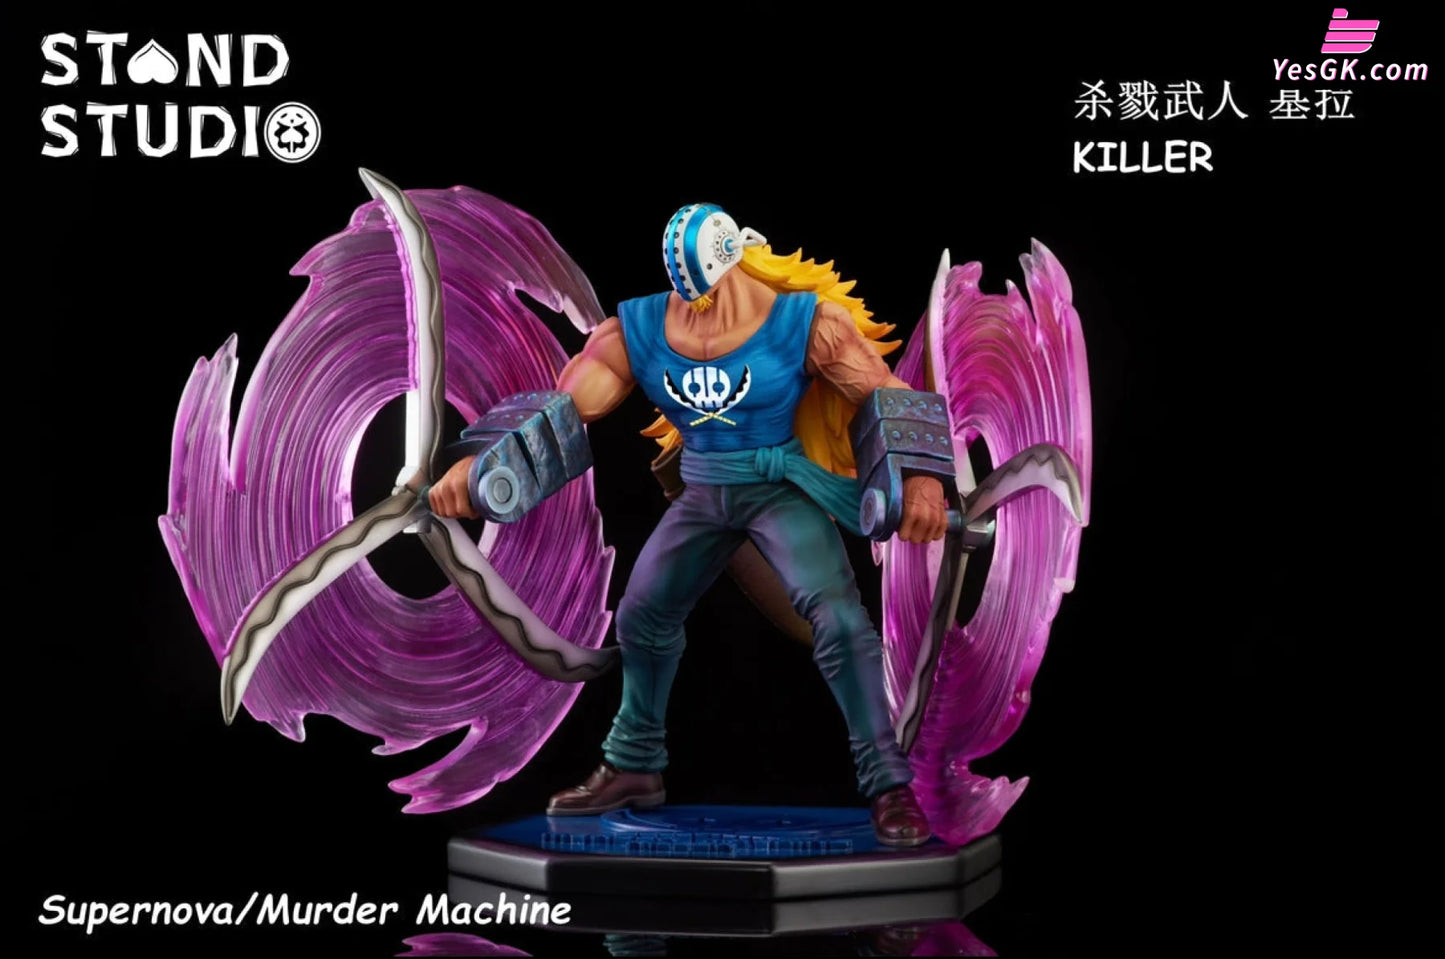 One Piece Supernova Series Killer Resin Statue - Stand Studio [Pre-Order Closed] Full Payment